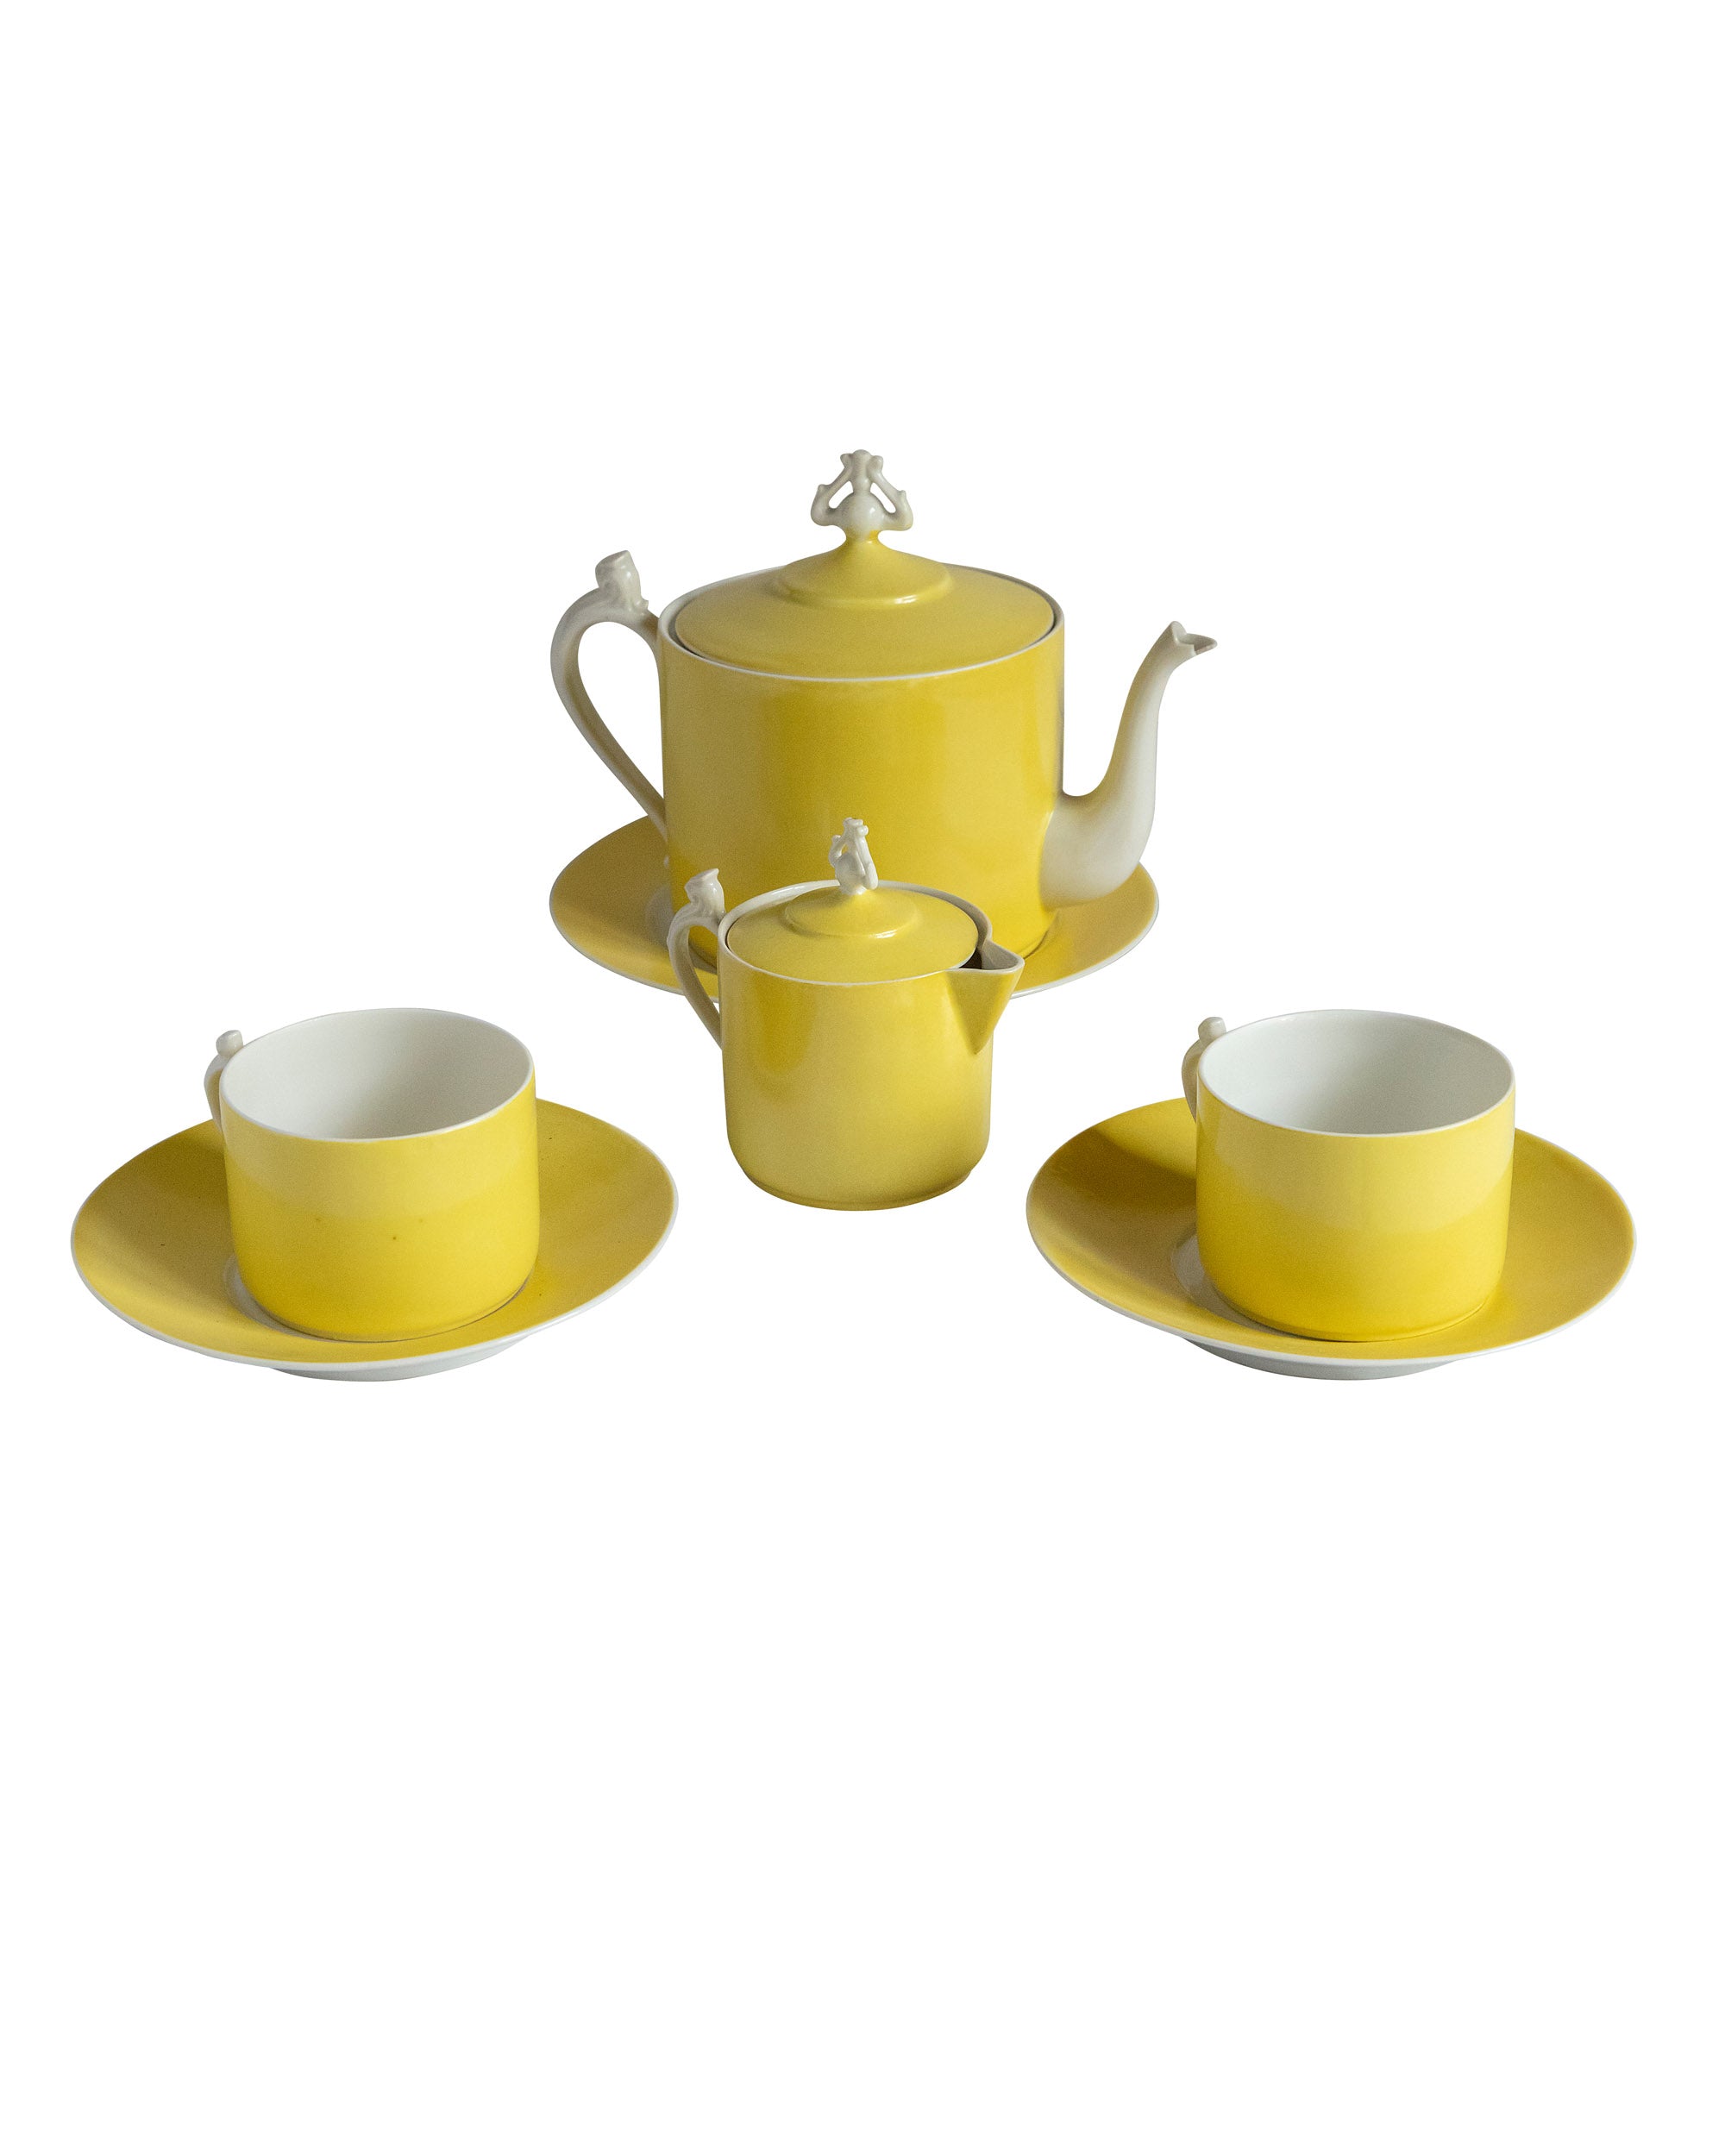 Yellow and white porcelain coffee set with ornaments on the handles